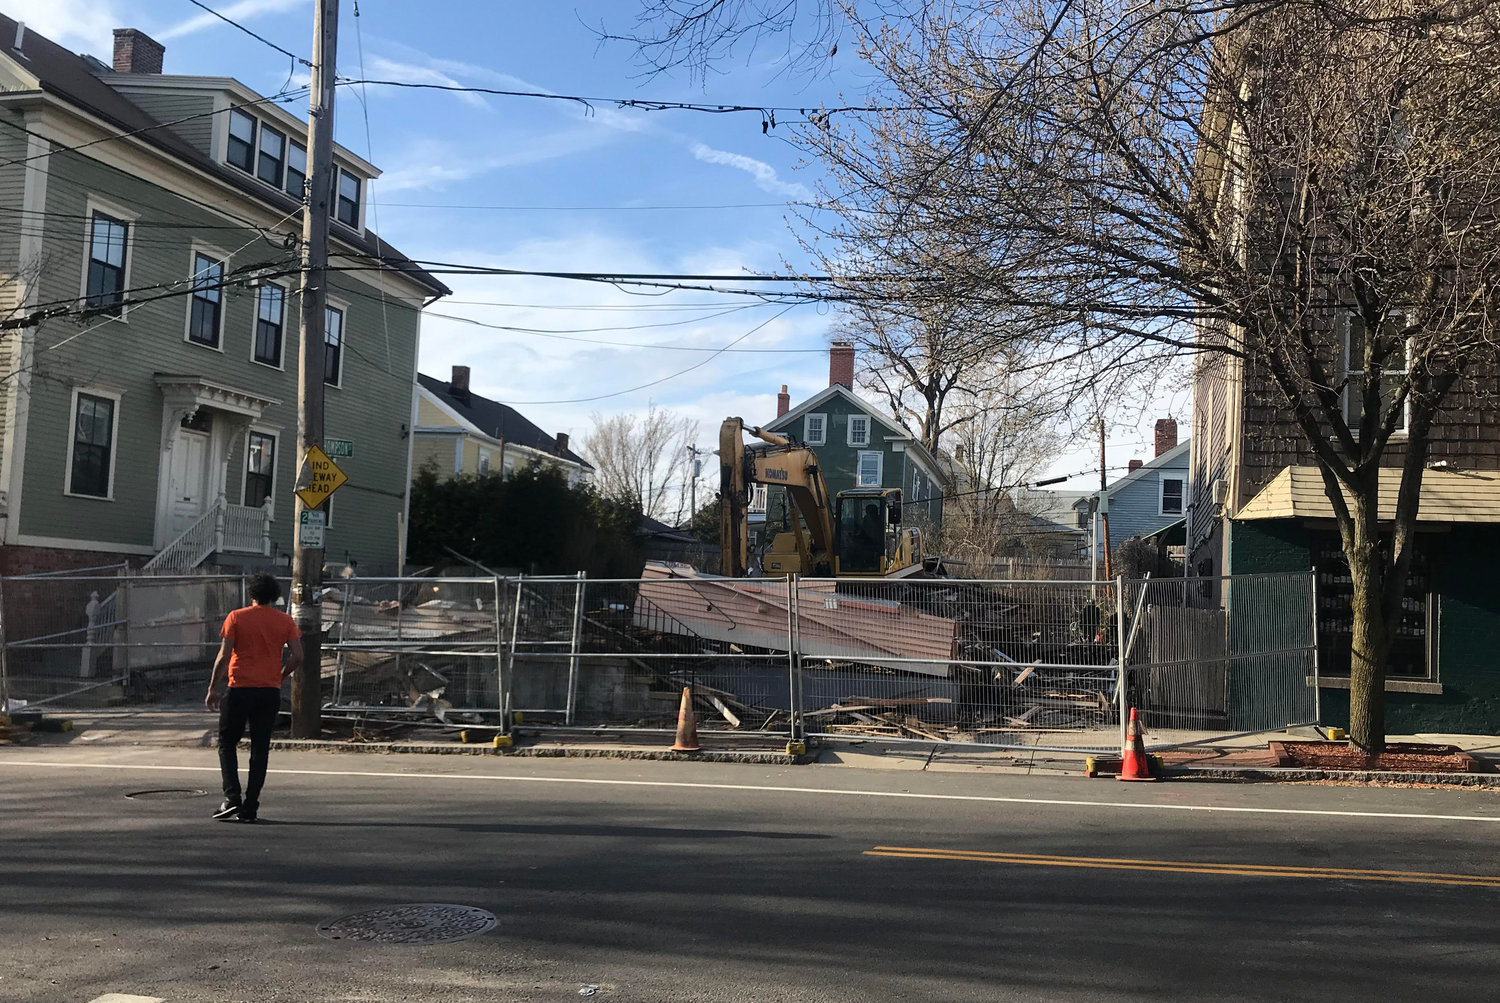 Fox Point neighbors were dismayed by the April demolition of the 200-year-old Duck & Bunny building, located on Wickenden Street